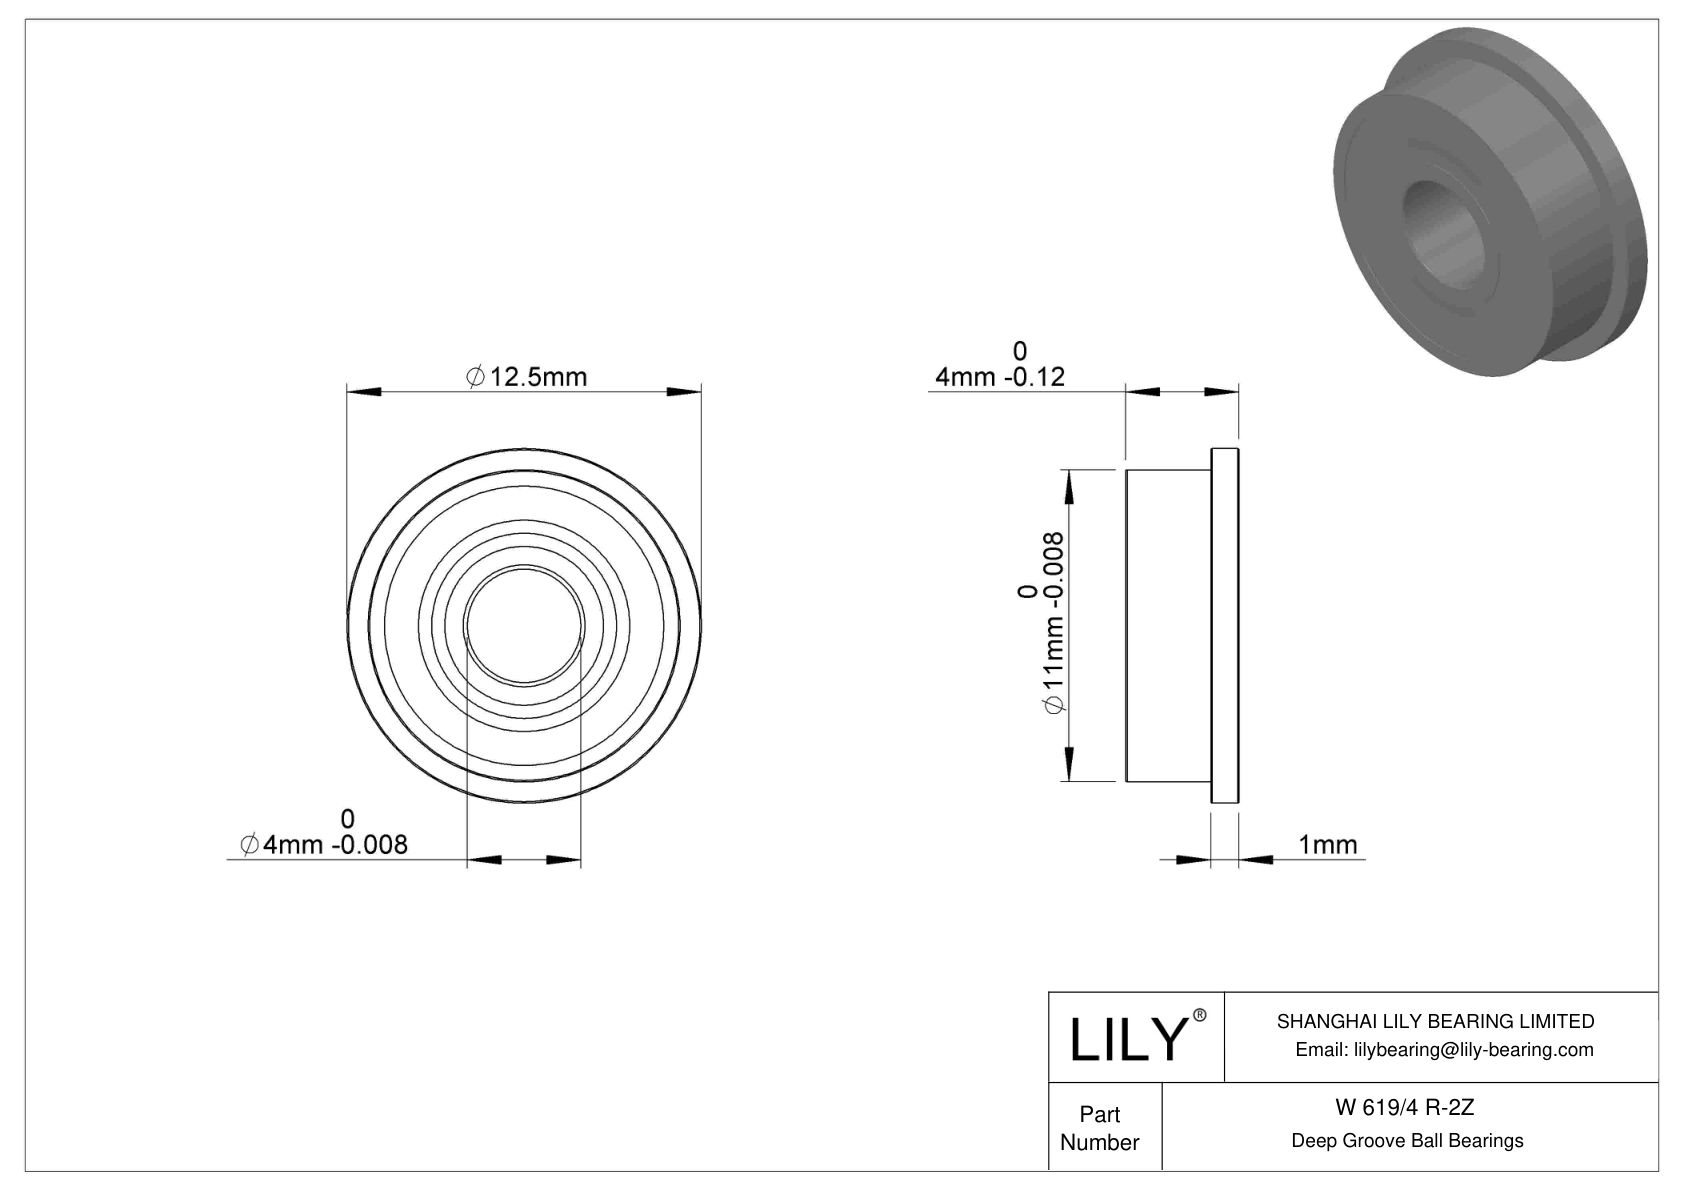 W 619/4 R-2Z Flanged Ball Bearings cad drawing